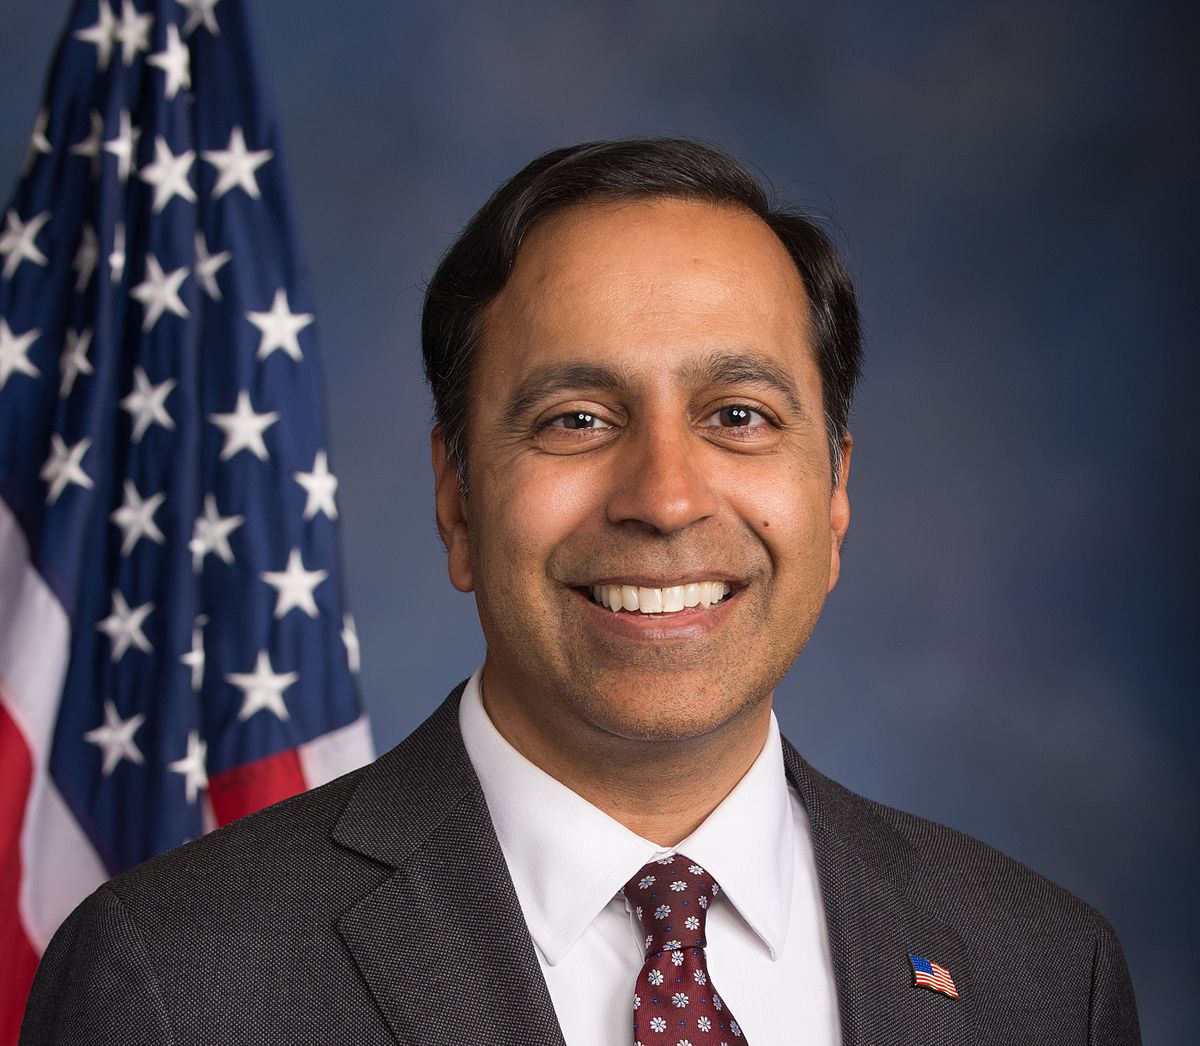 Chicago Rep. Raja Krishnamoorthi urges FEMA to account for climate change while projecting flood and disaster risk